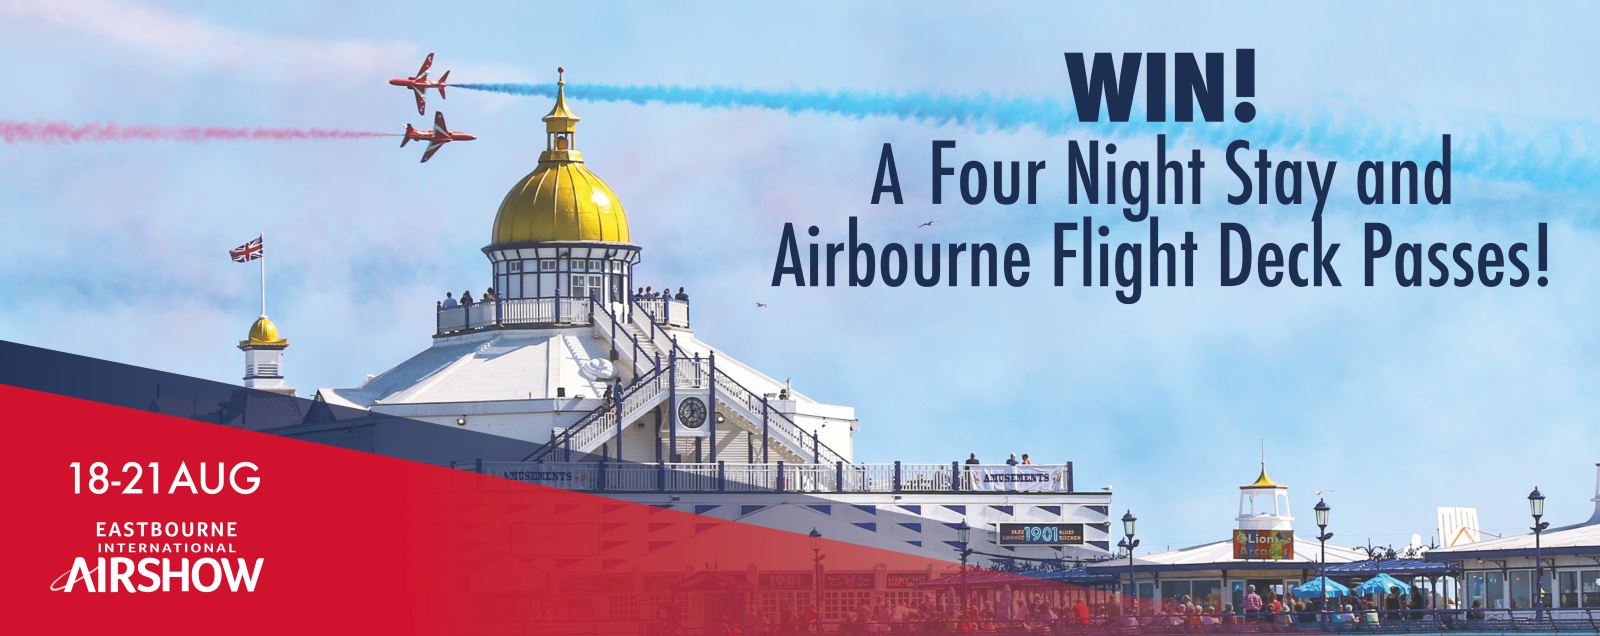 Win a stay at Airbourne